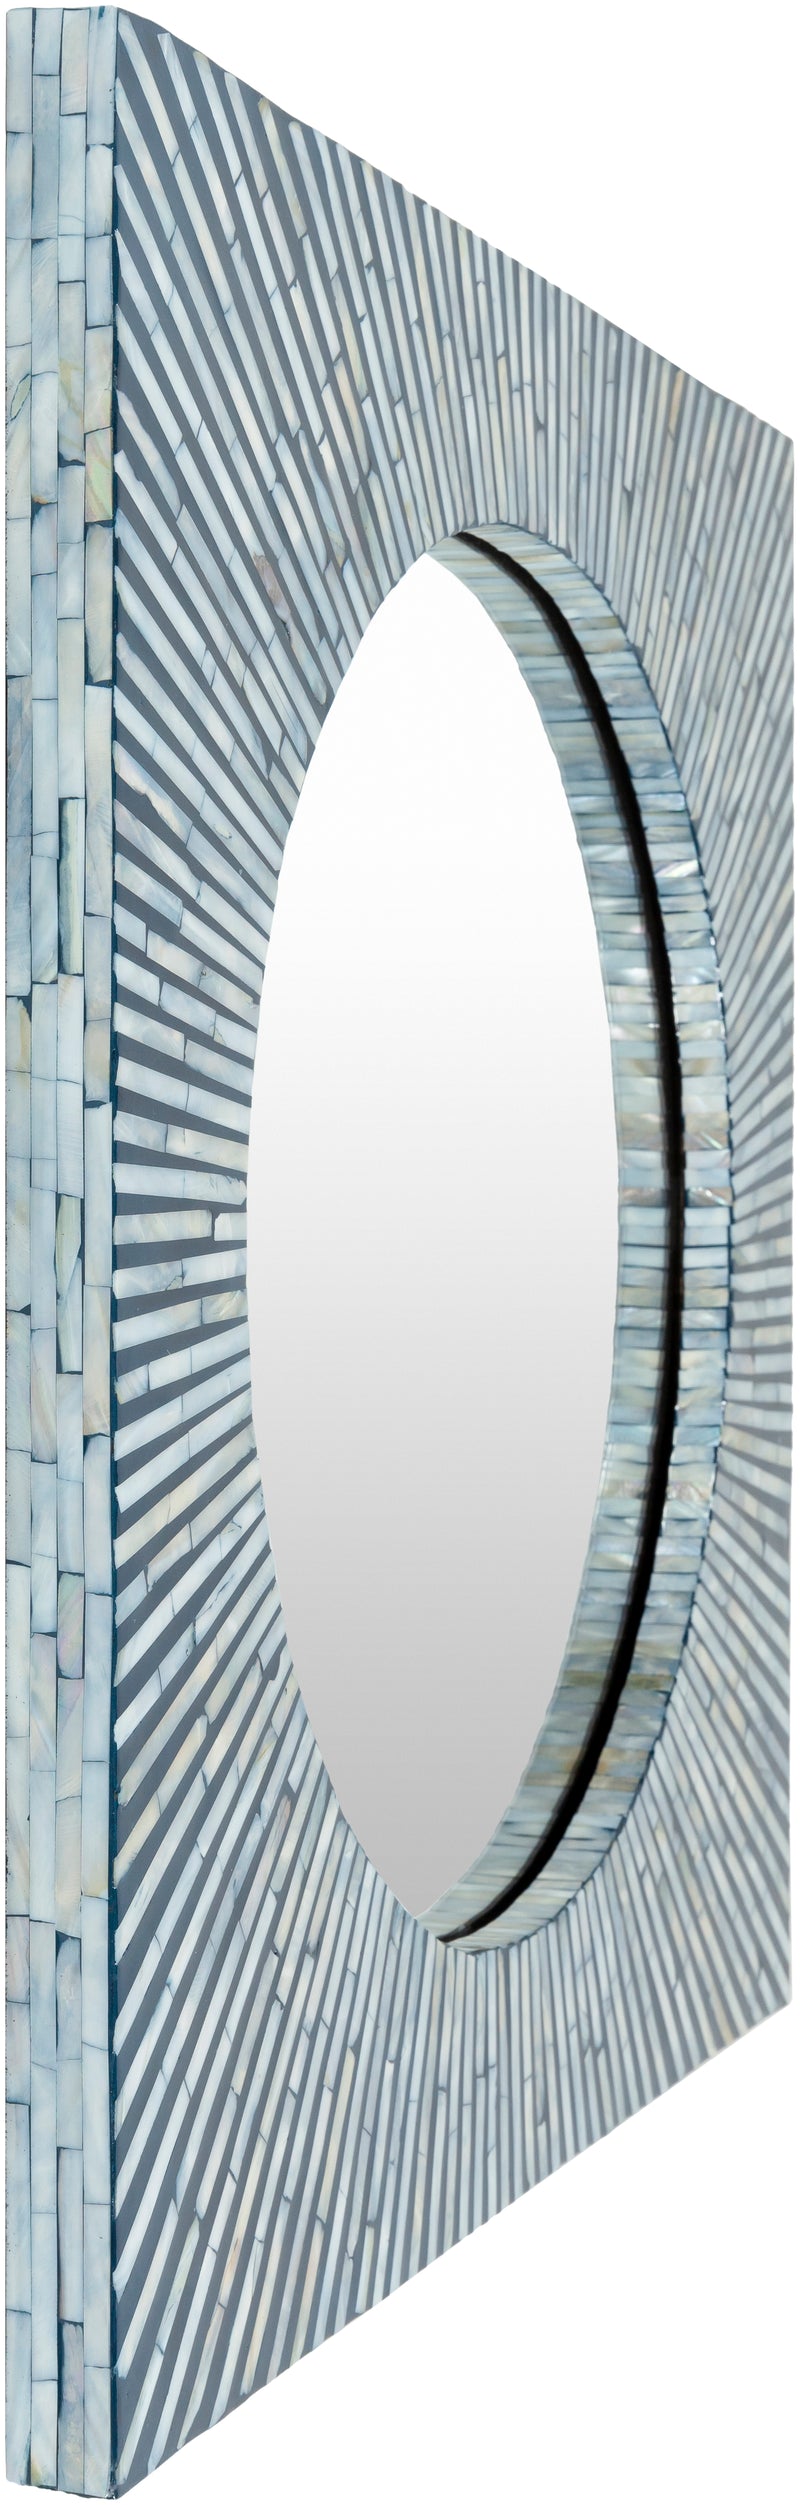 media image for Avondale AVD-001 Square Mirror in Blue and Ivory by Surya 242